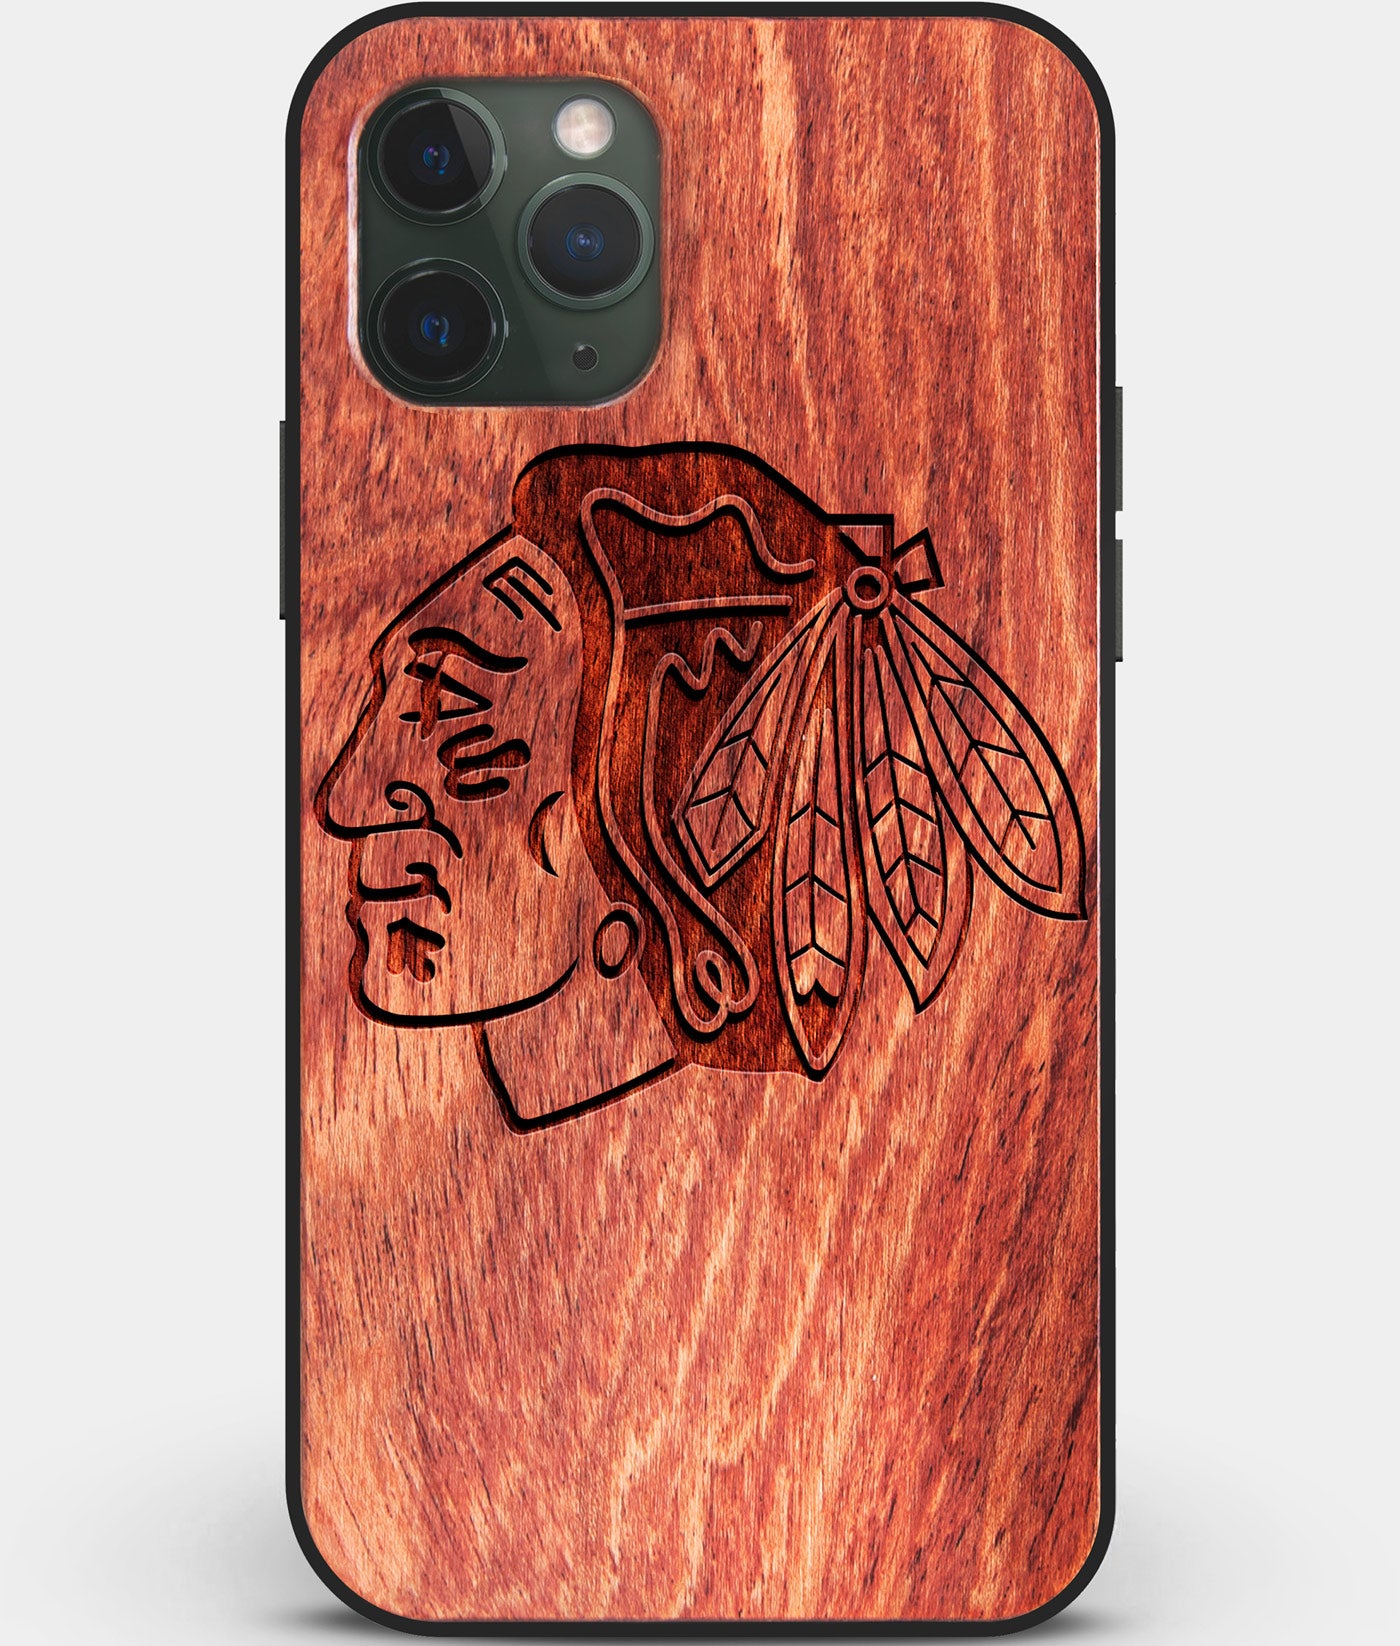 Custom Carved Wood Chicago Blackhawks iPhone 11 Pro Case | Personalized Mahogany Wood Chicago Blackhawks Cover, Birthday Gift, Gifts For Him, Monogrammed Gift For Fan | by Engraved In Nature